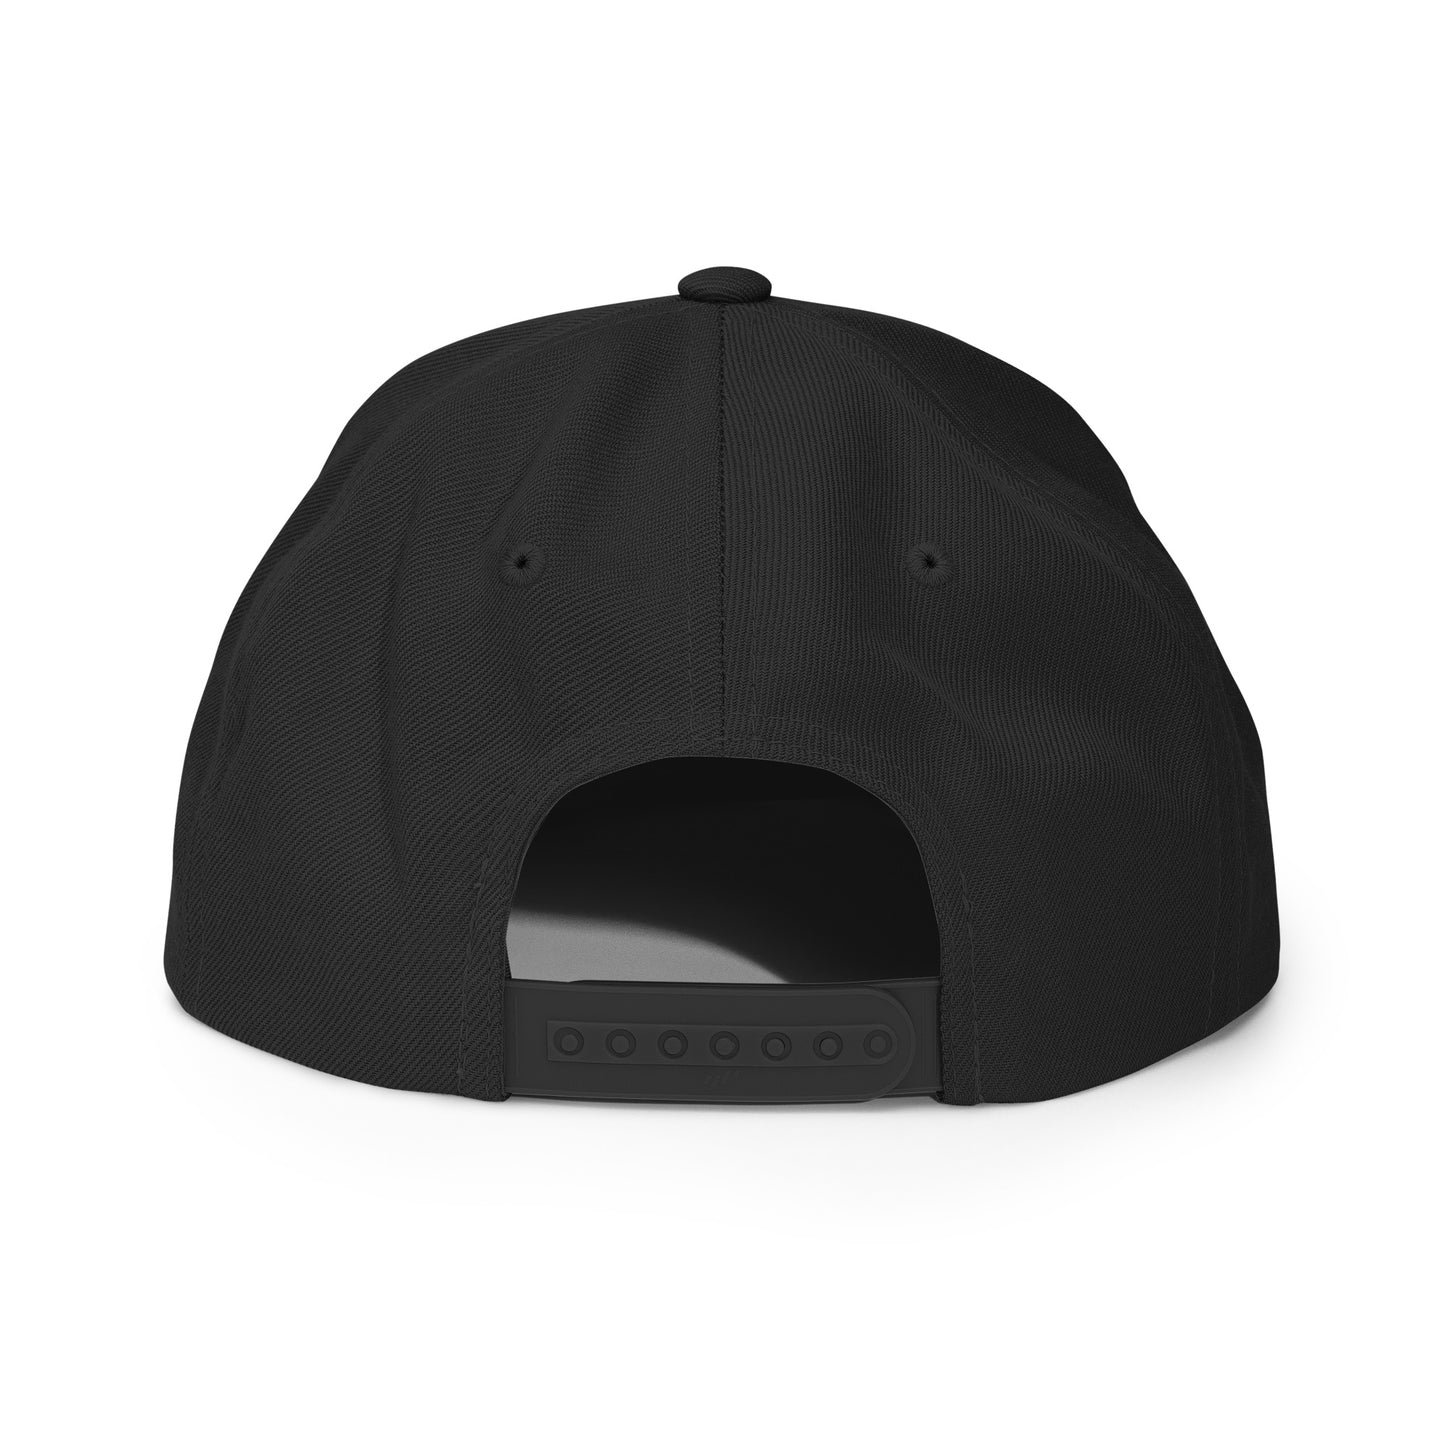 Oval Car Sticker Snapback Hat • Black and White Embroidery